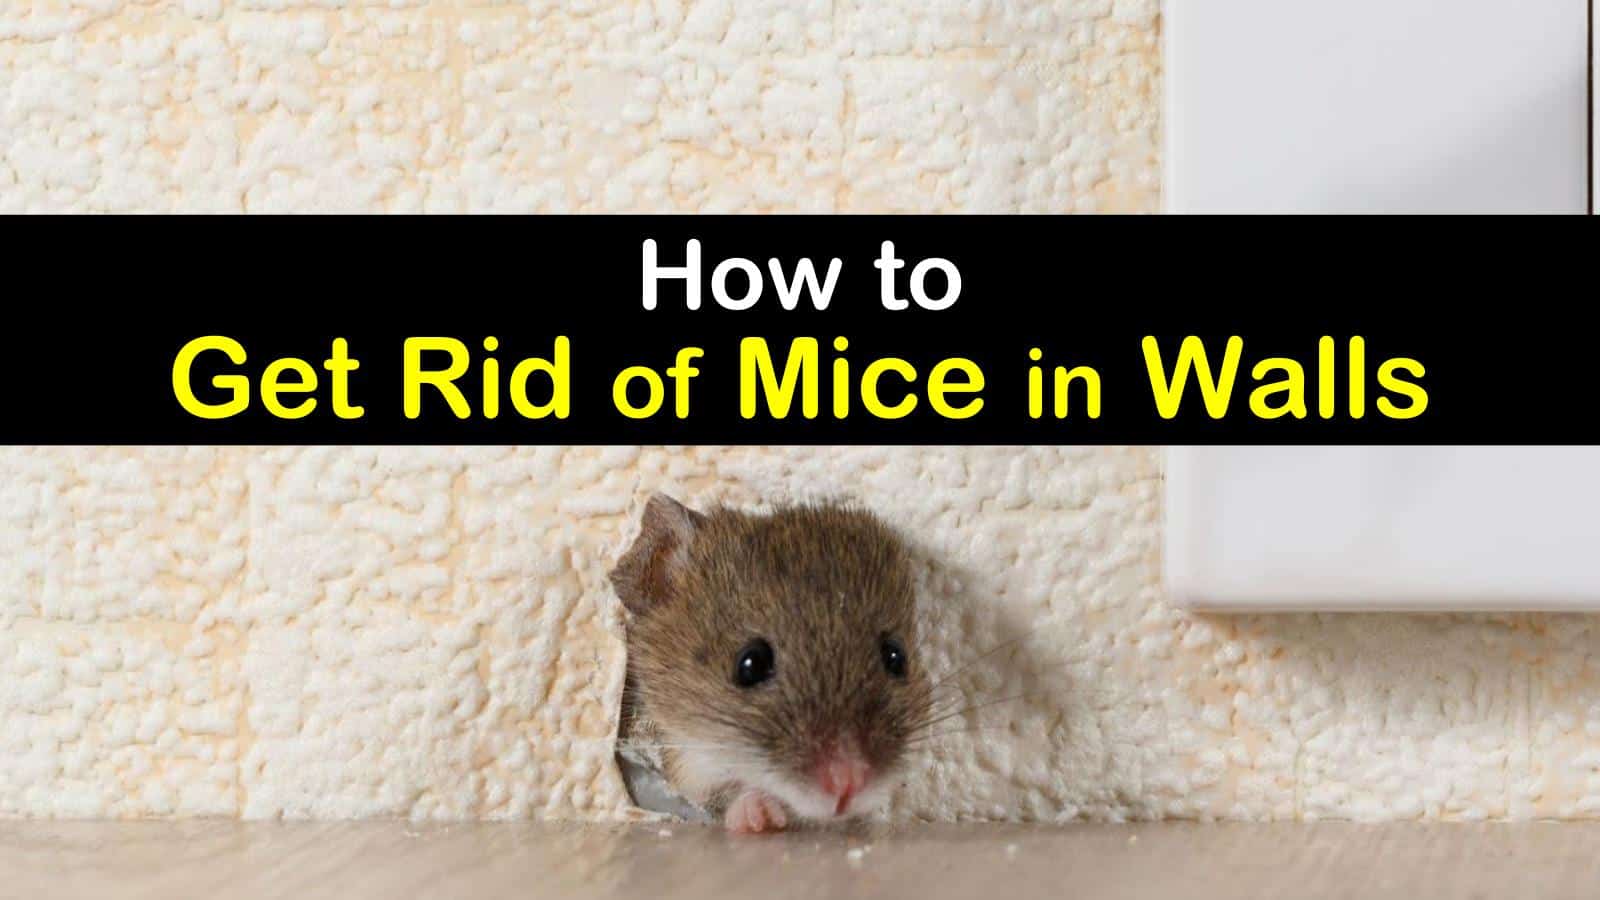 How to Help Get Rid of Mice in Walls